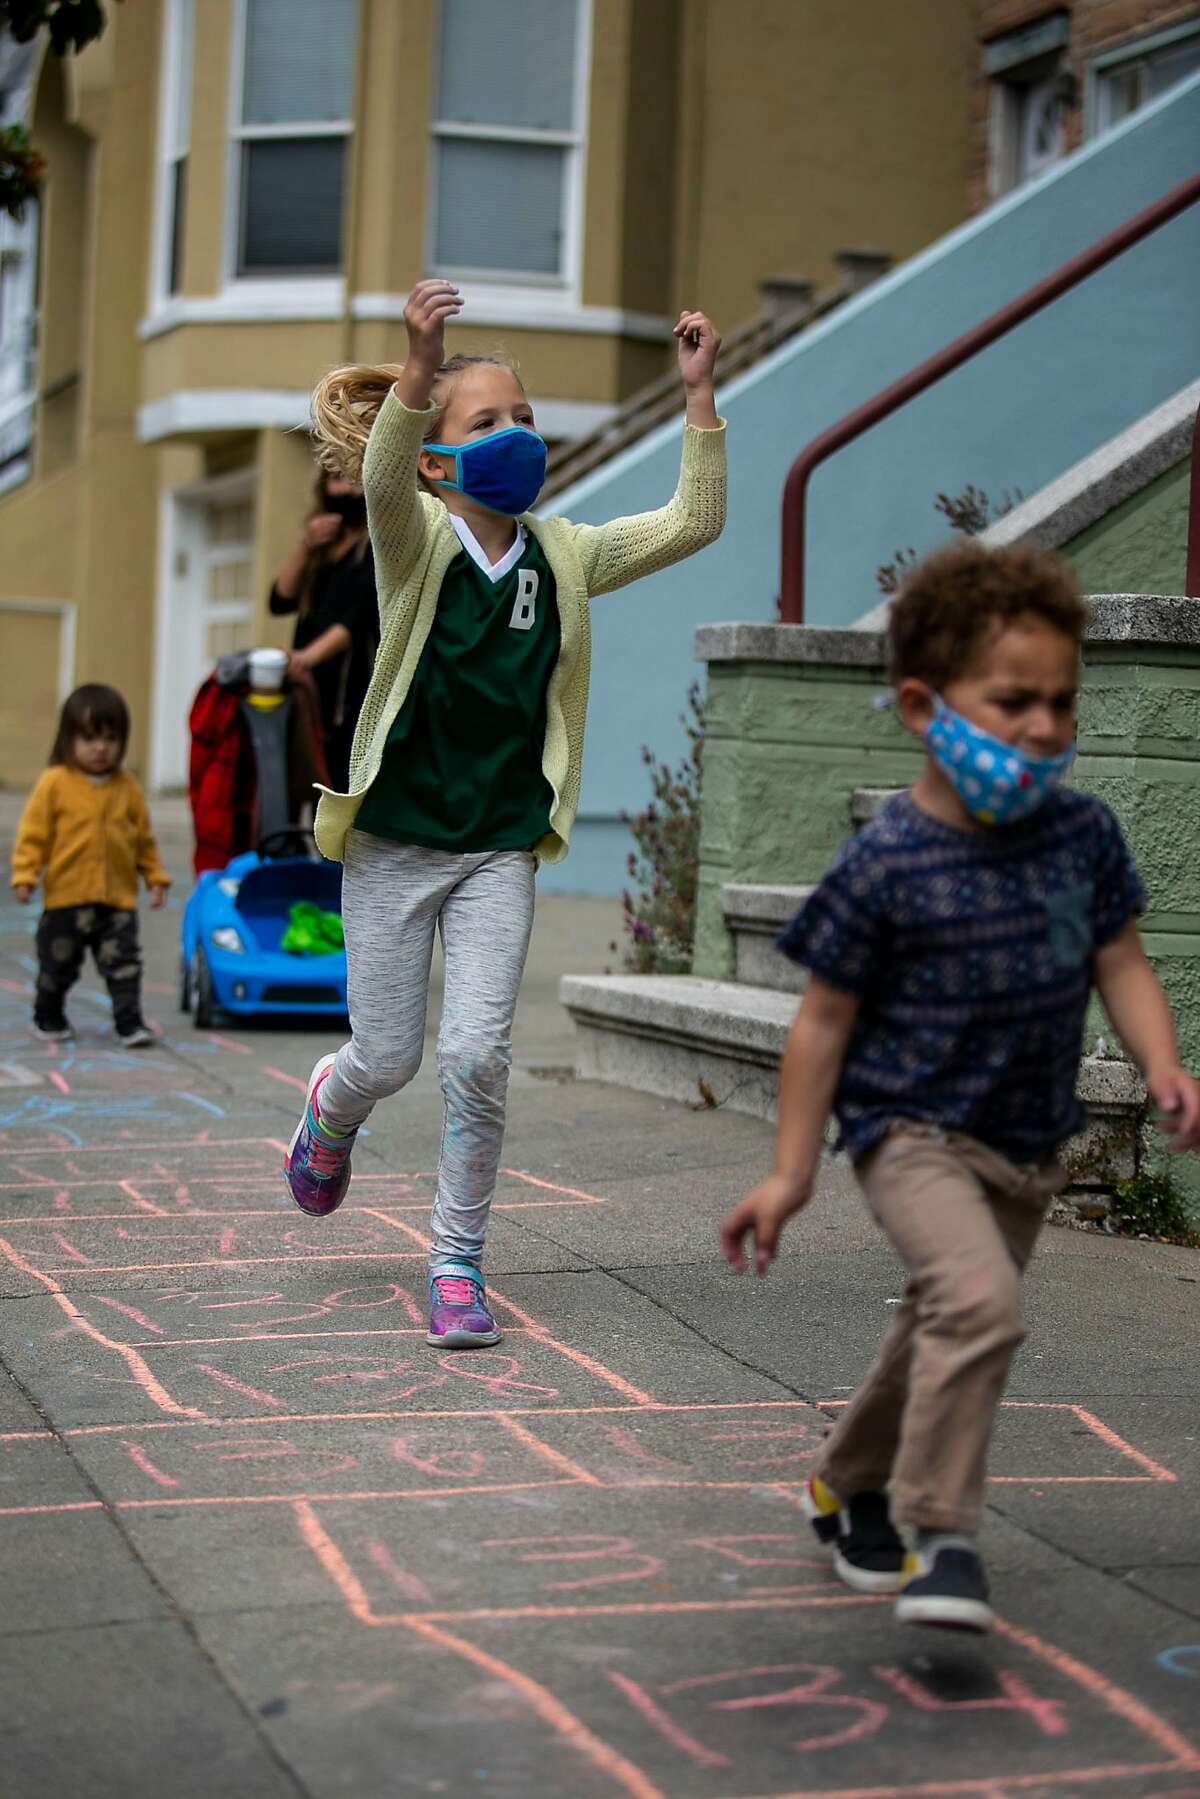 Quin Delaplane, 7, follows Two Chima, 3, as they test out their section of a hopscotch course along Fulton Street during the Hopscotch Your Block event on Saturday, July 17, 2020 in the North of Panhandle neighborhood of San Francisco, Calif. The event, organized by the North of Panhandle Neighborhood Association, aimed to create a physically distanced and synchronized four mile long hopscotch course through the neighborhood.